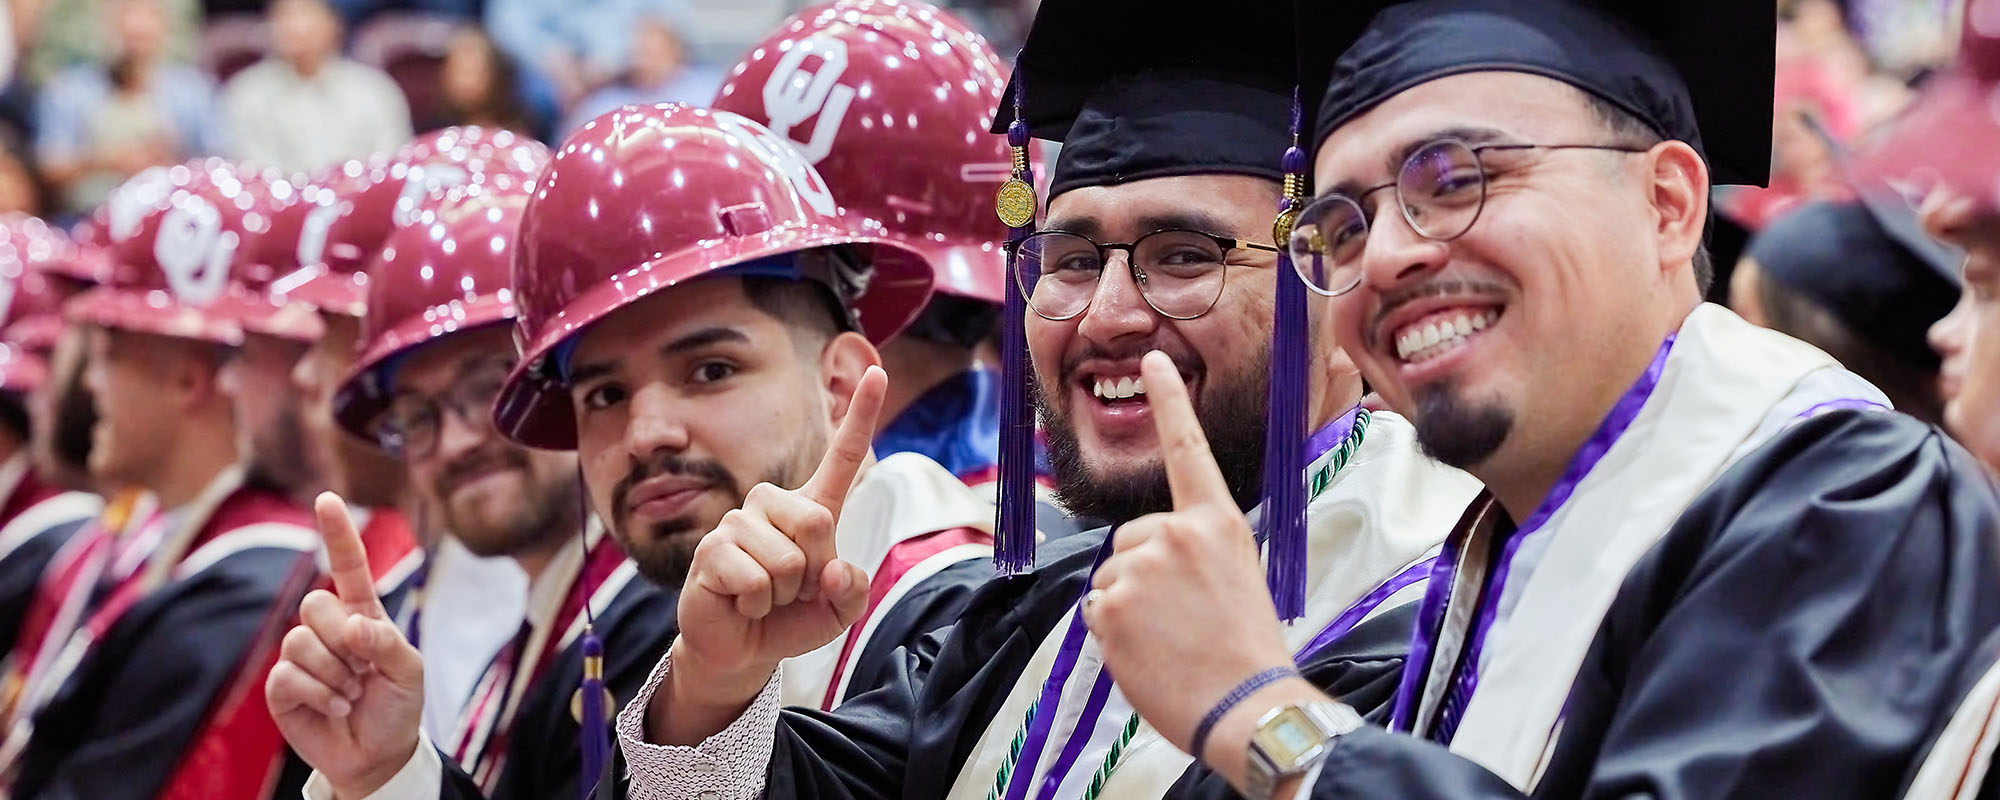 A group of graduates wearing regalia and raising their pointer finger during a ceremony.